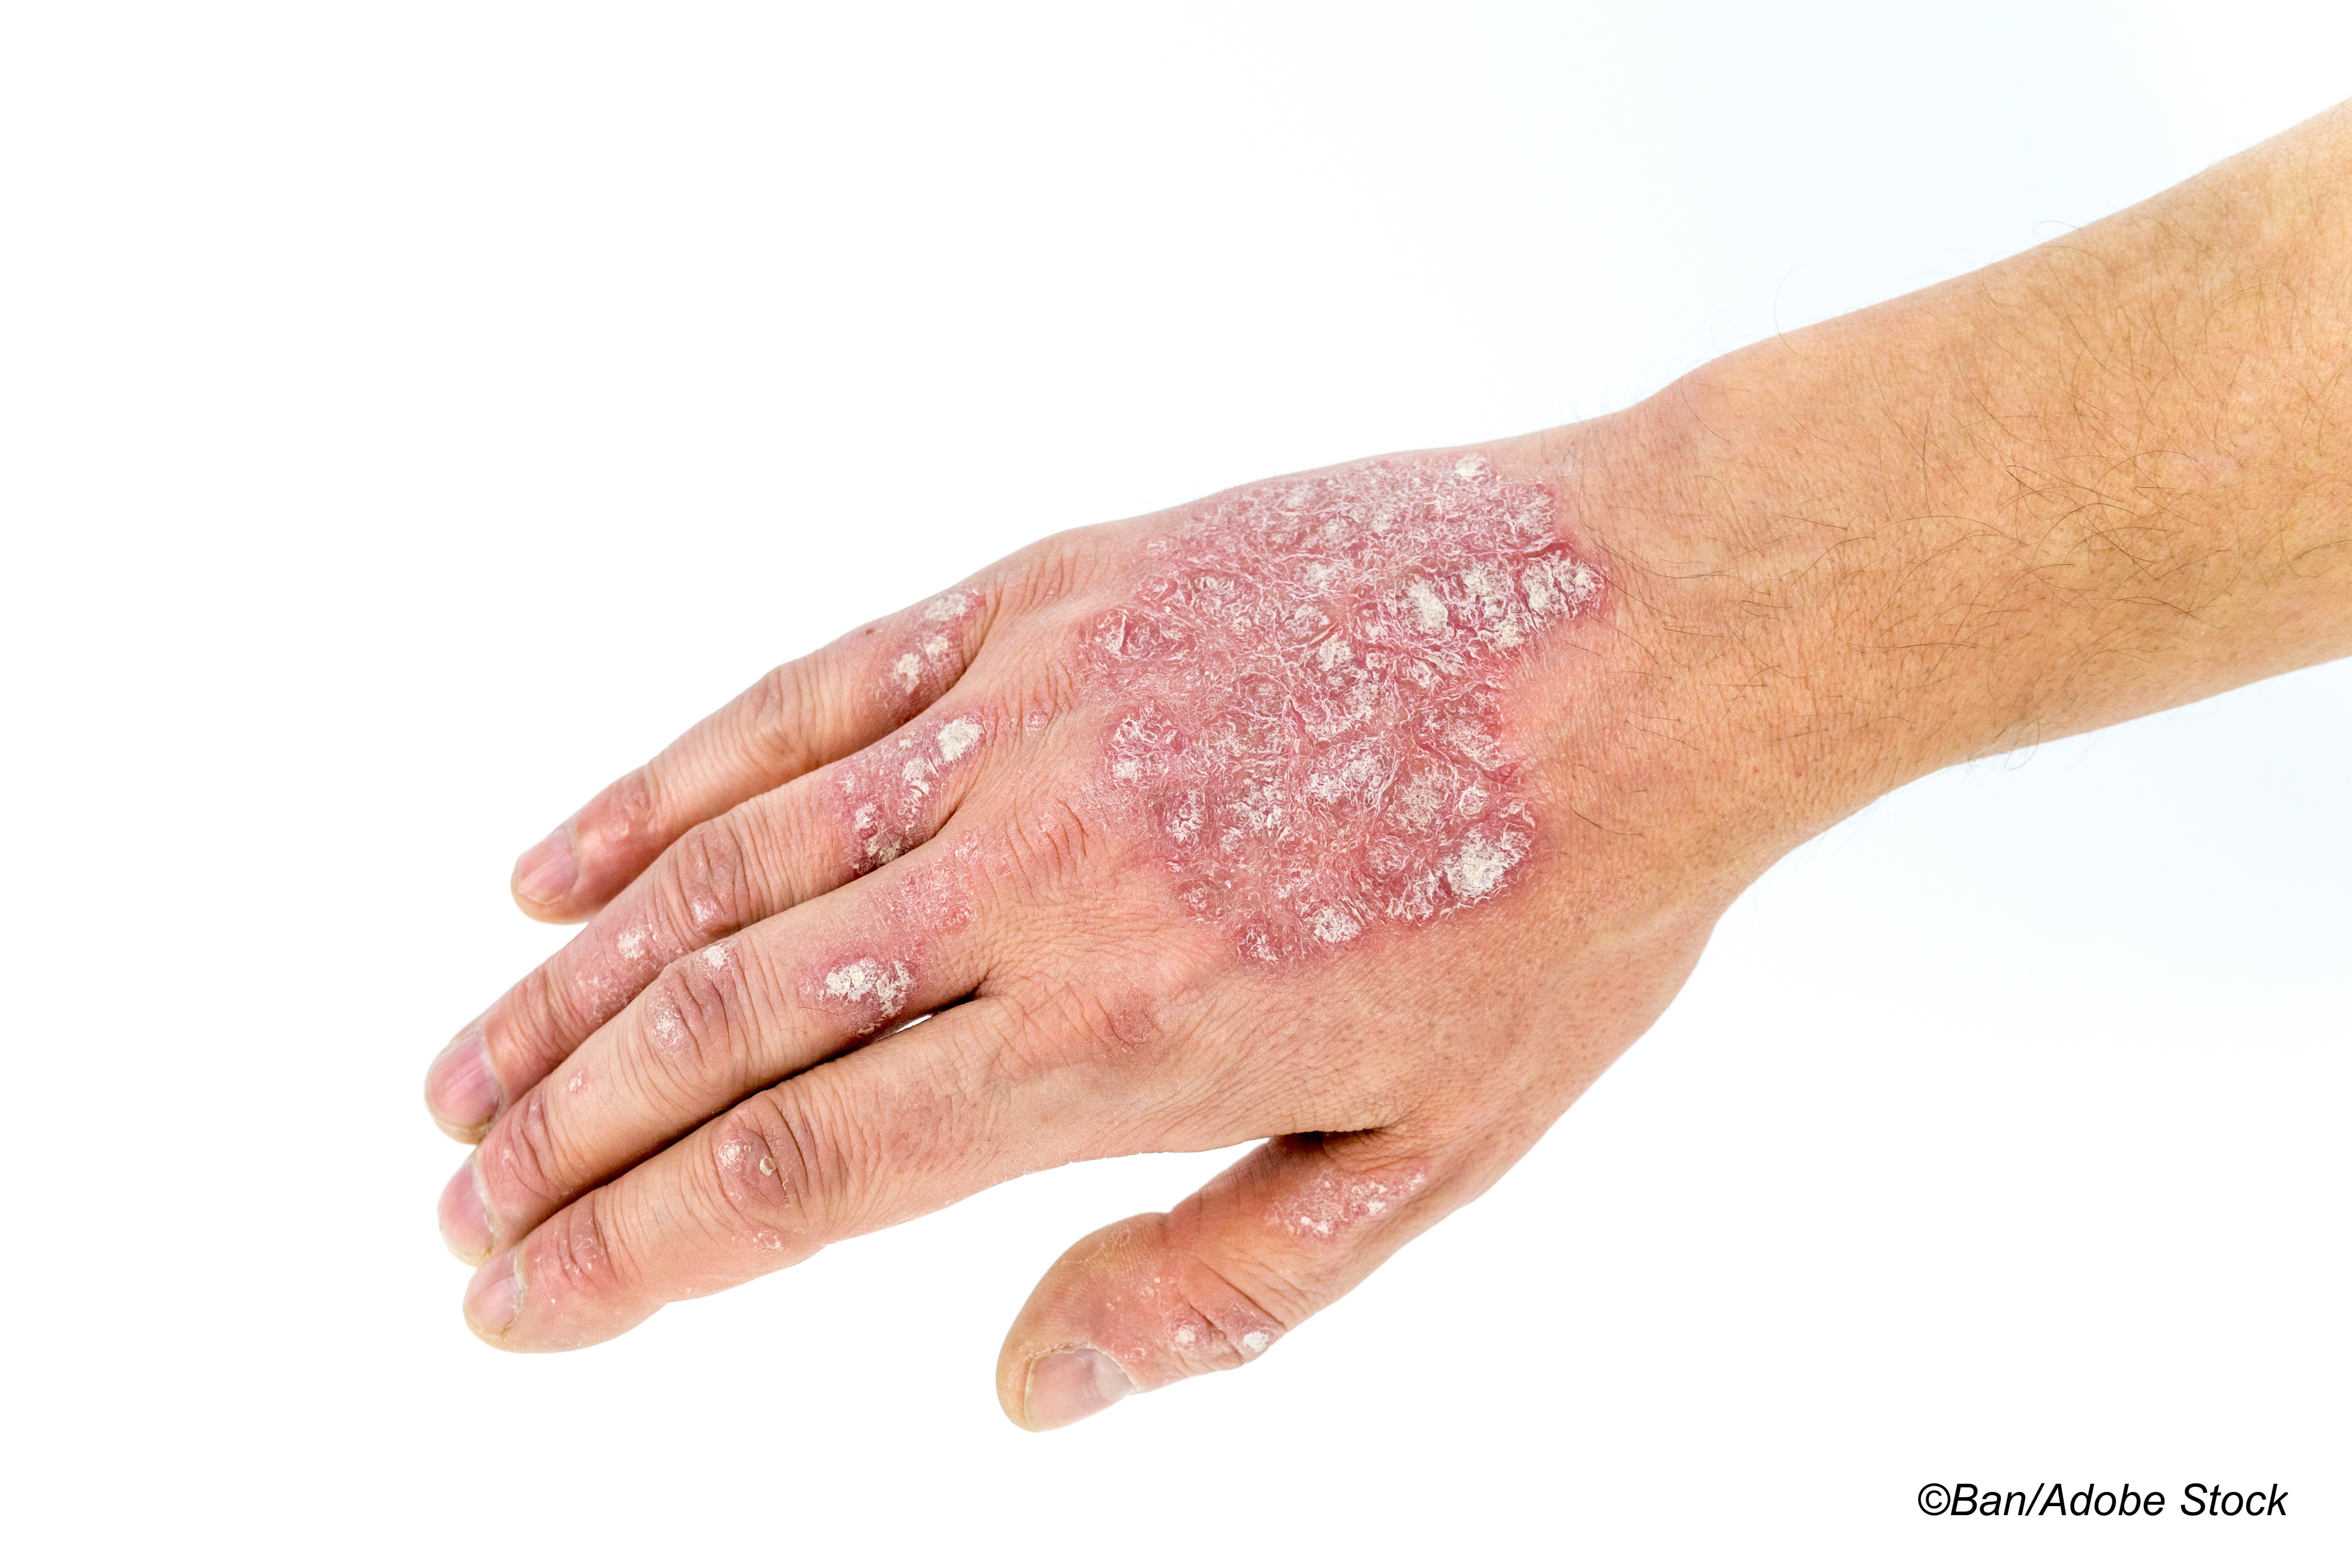 First-in-Class Tapinarof Effective in Mild-to-Moderate Plaque Psoriasis